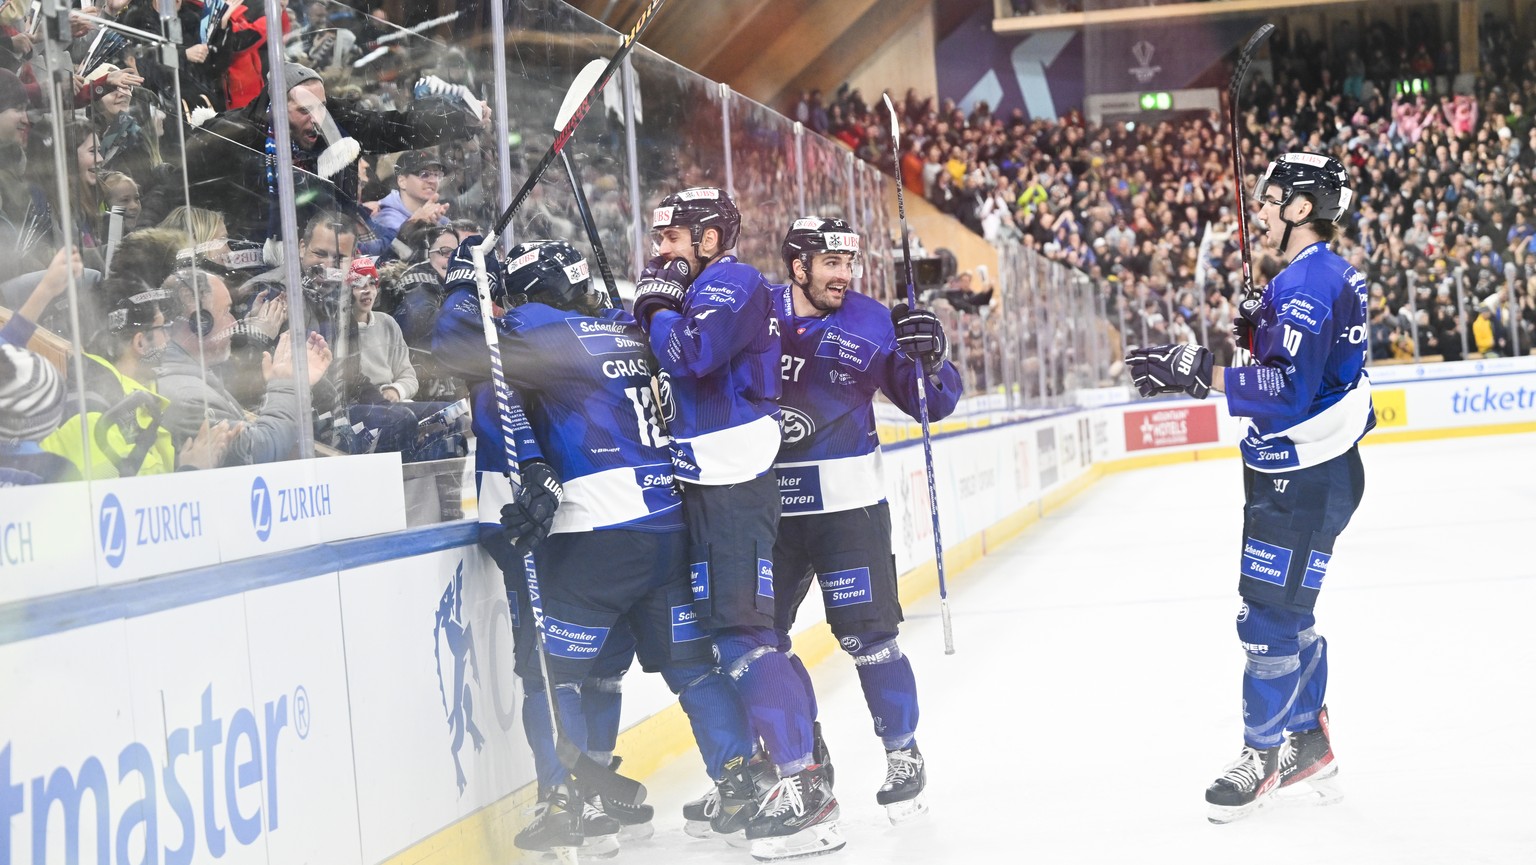 Ambri celebrates after Ambri&#039;s Brandon McMillan scored 2-0 during the game between Switzerland&#039;s HC Ambri-Piotta and Finland&#039;s IFK Helsinki, at the 94th Spengler Cup ice hockey tourname ...